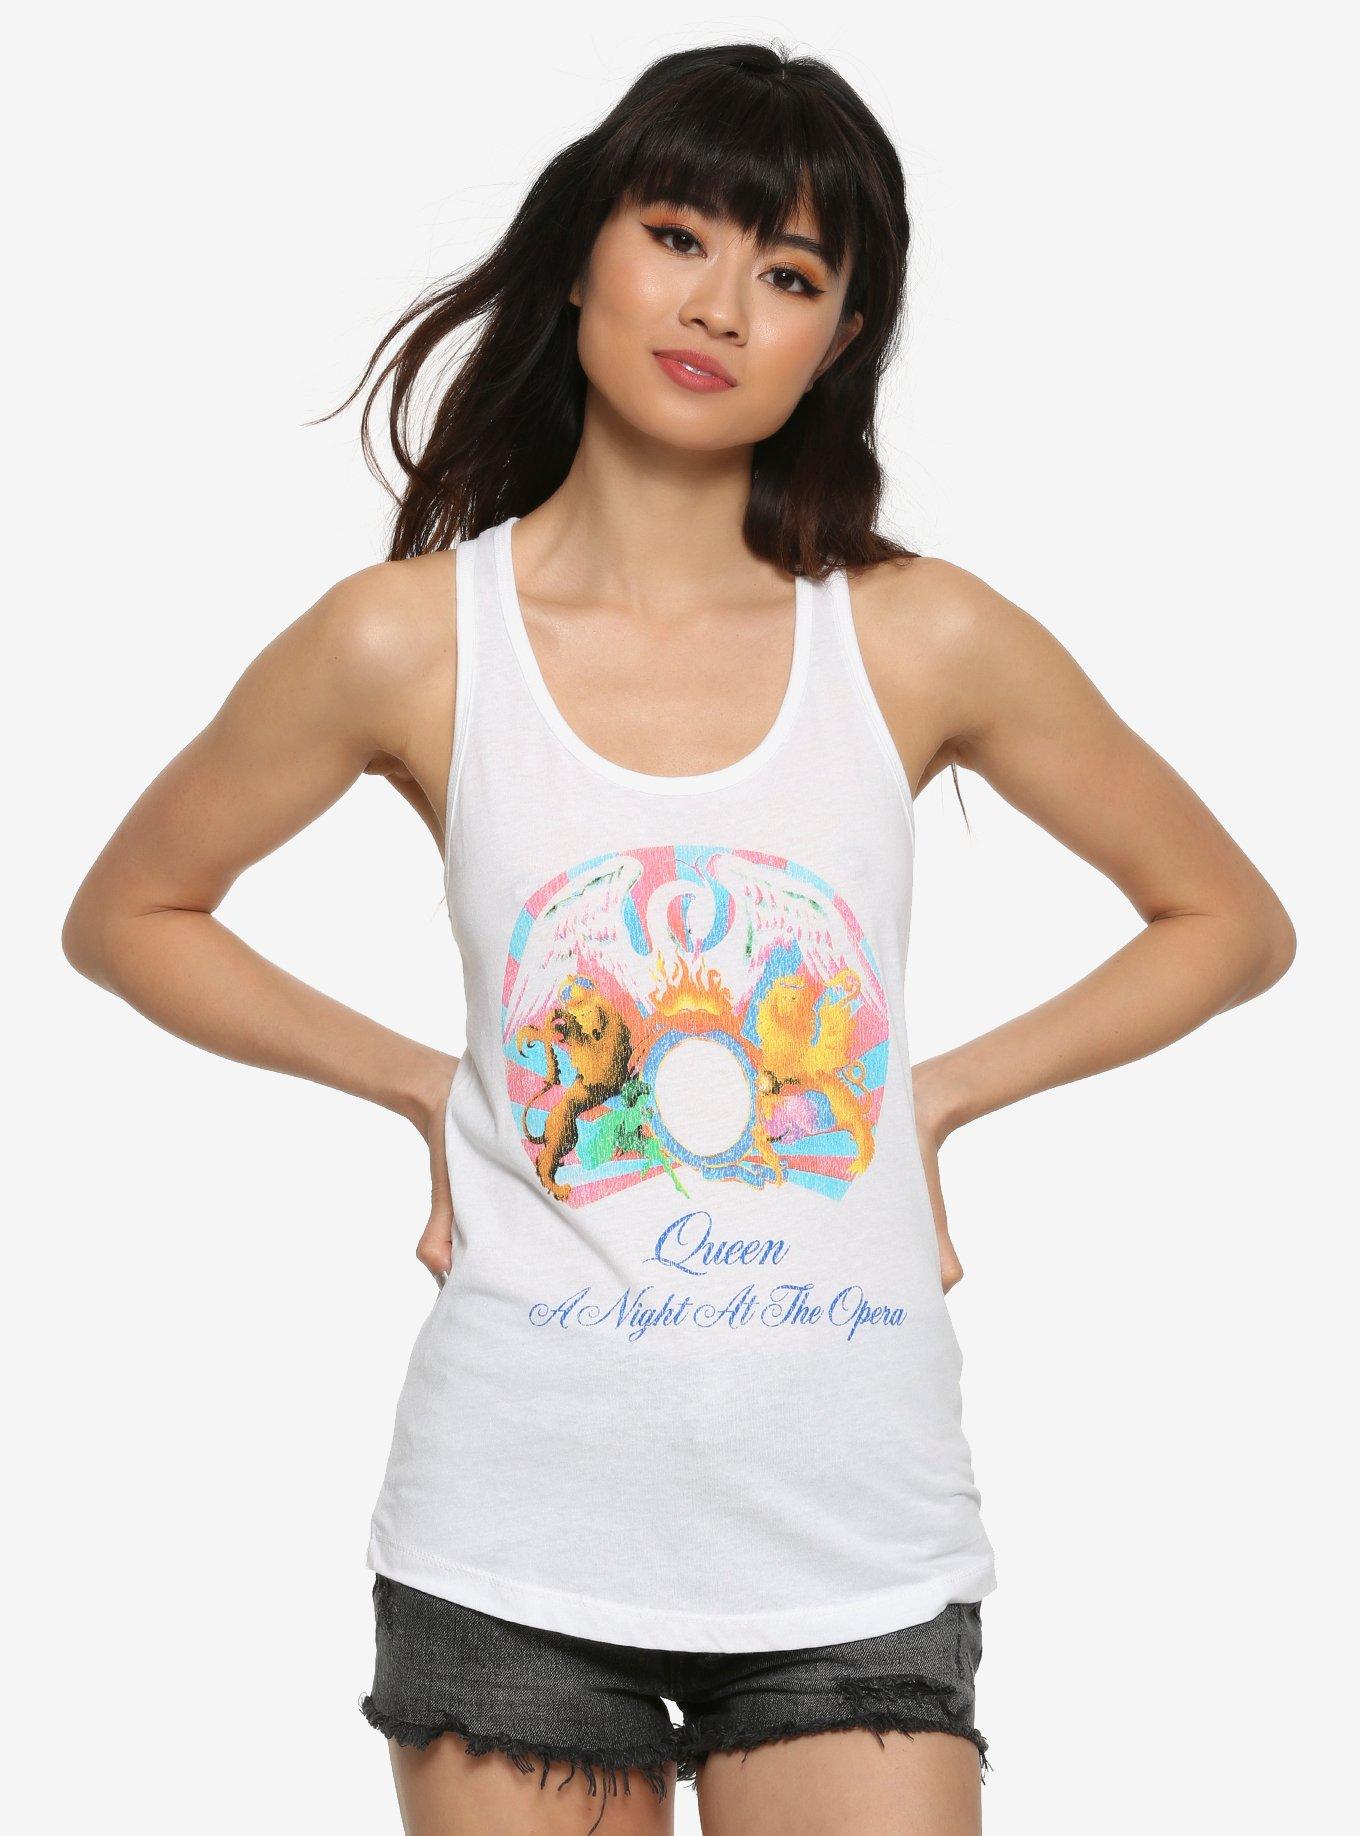 Queen A Night At The Opera Album Cover Girls Tank Top, WHITE, hi-res